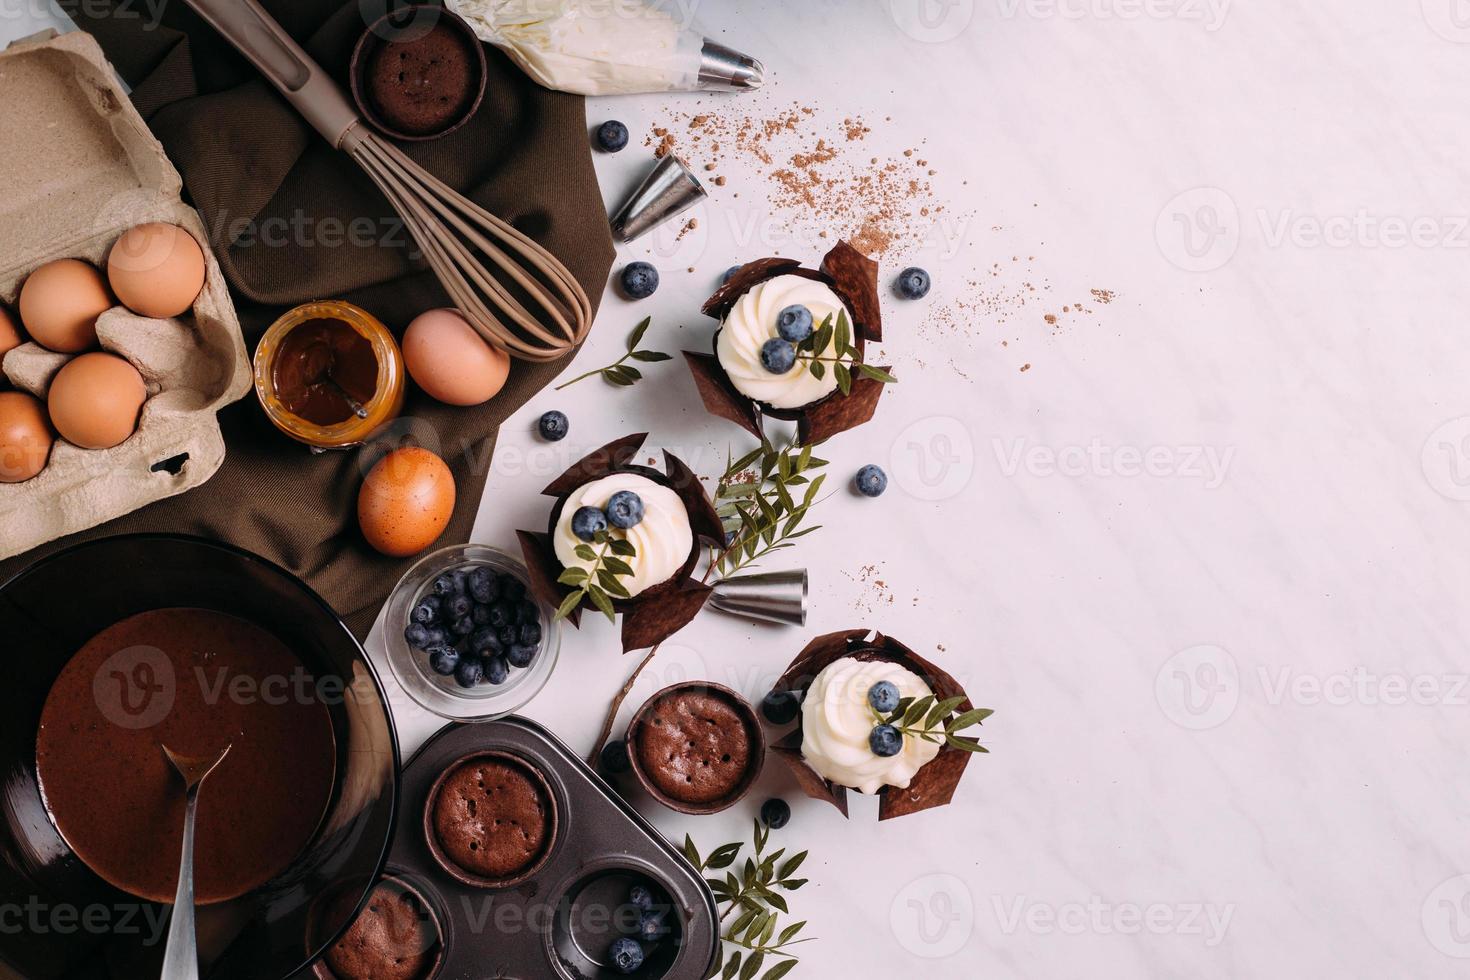 cupcakes with cream and blueberries on kitchen table photo